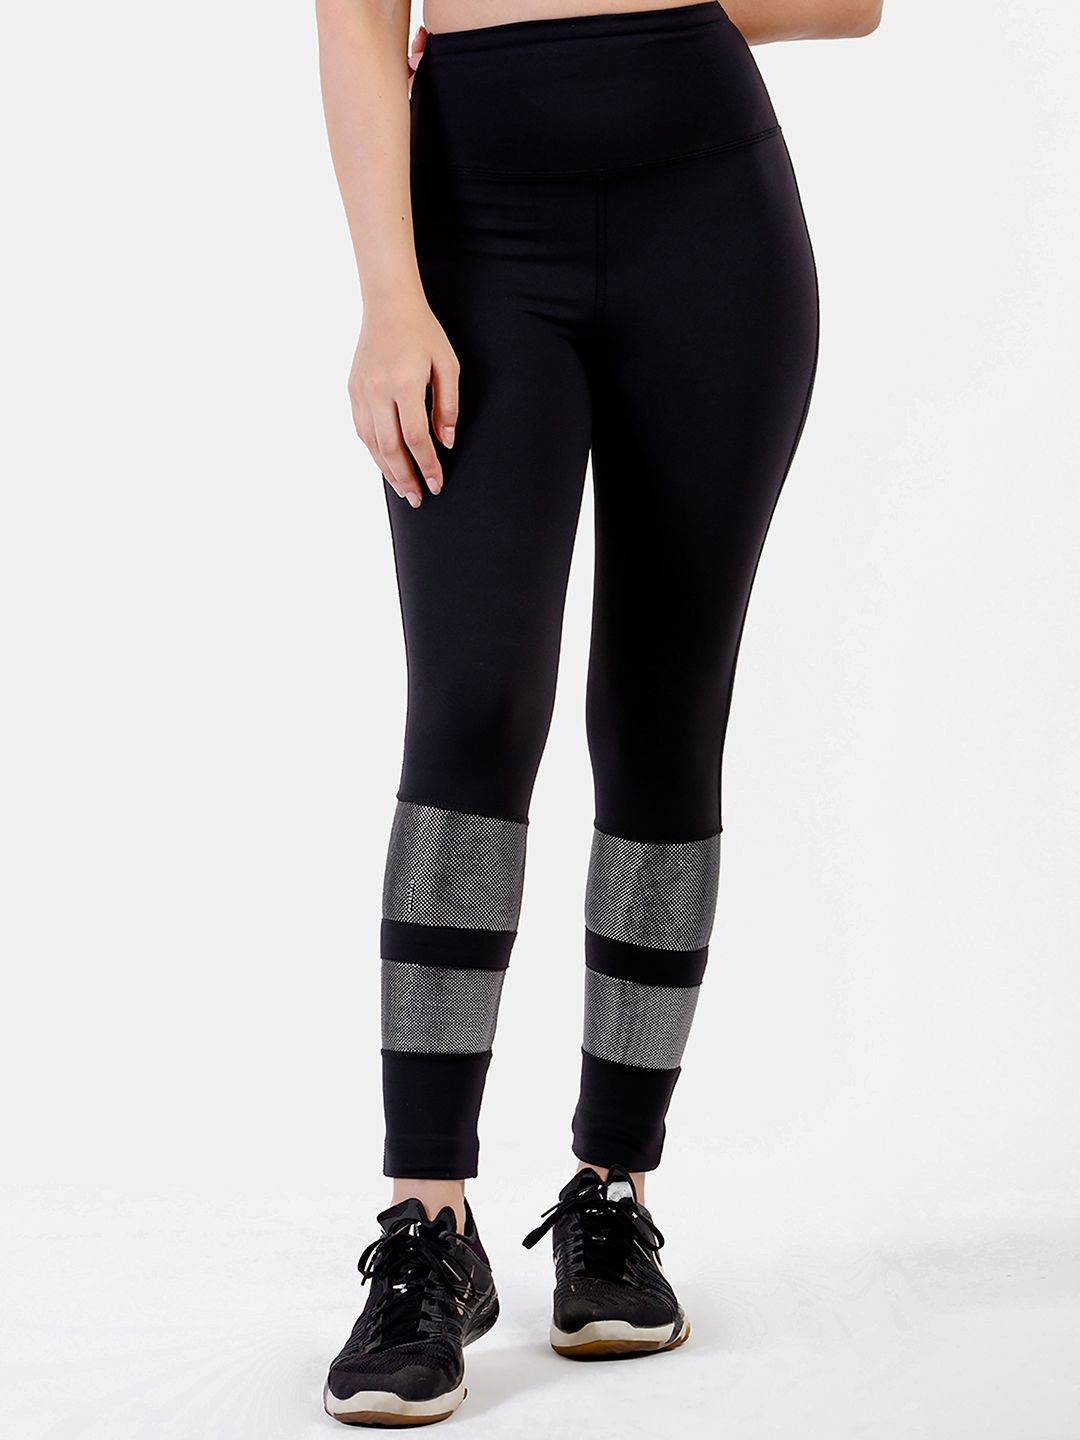 Skyria Women Black & Silver Tech Dry Sweat Wicking Gym Tights Price in India